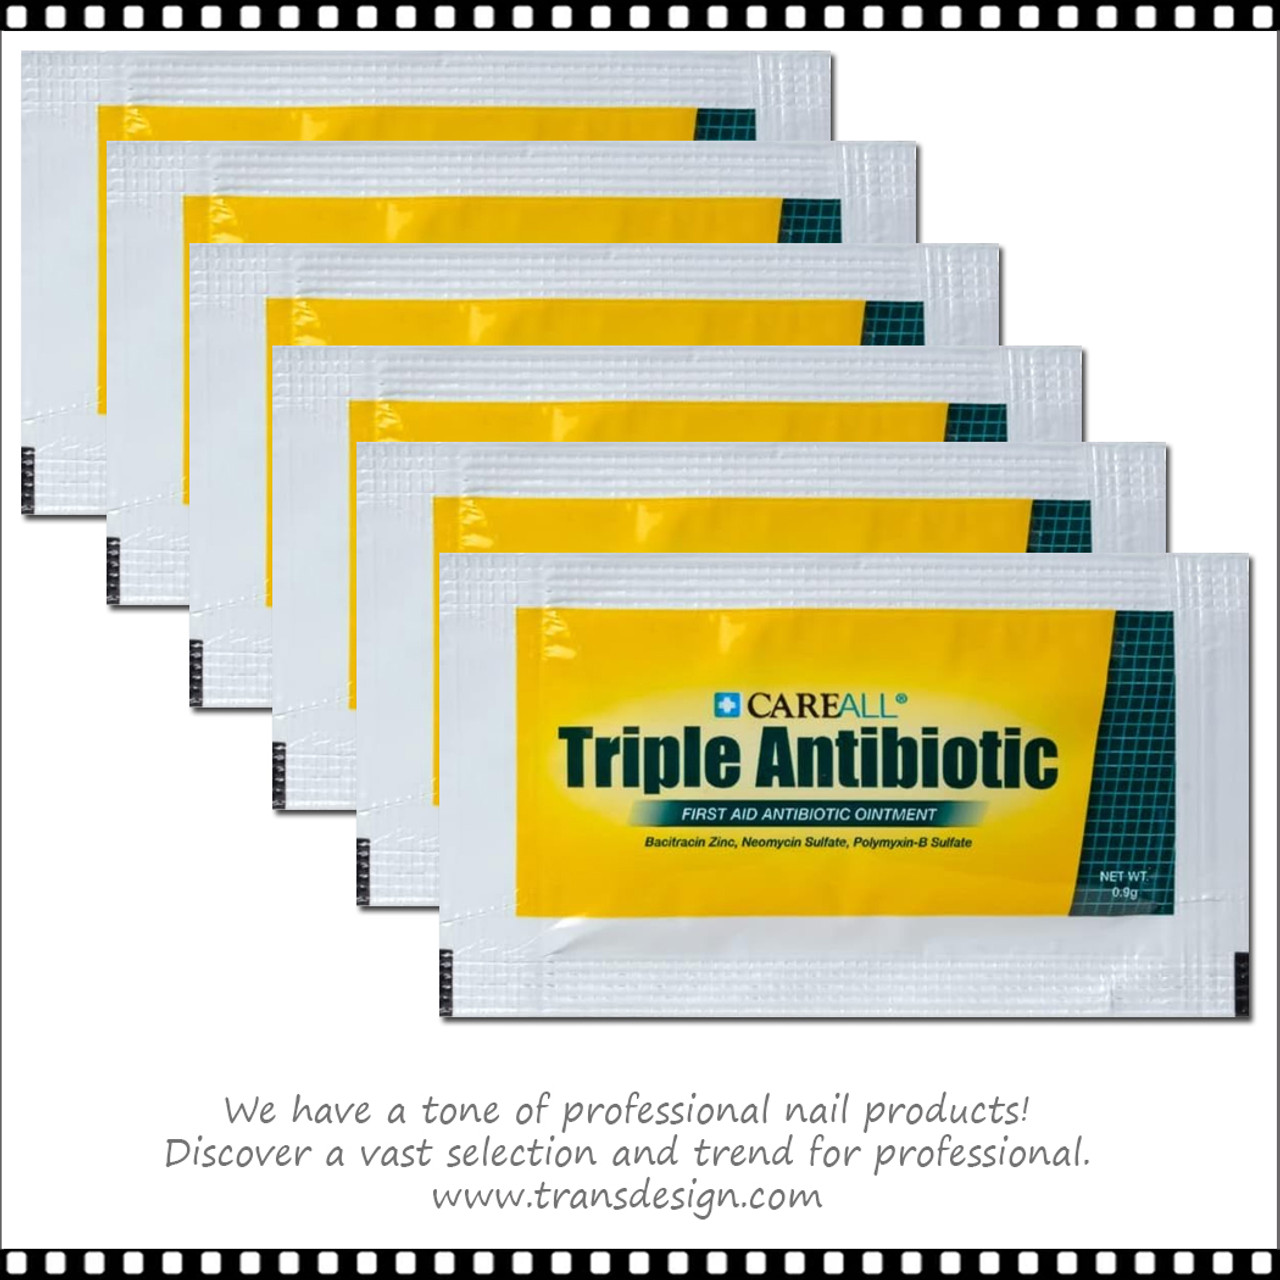 85317 CAREALL TRIPLE ANTIBIOTIC Ointment 08503.1706469258